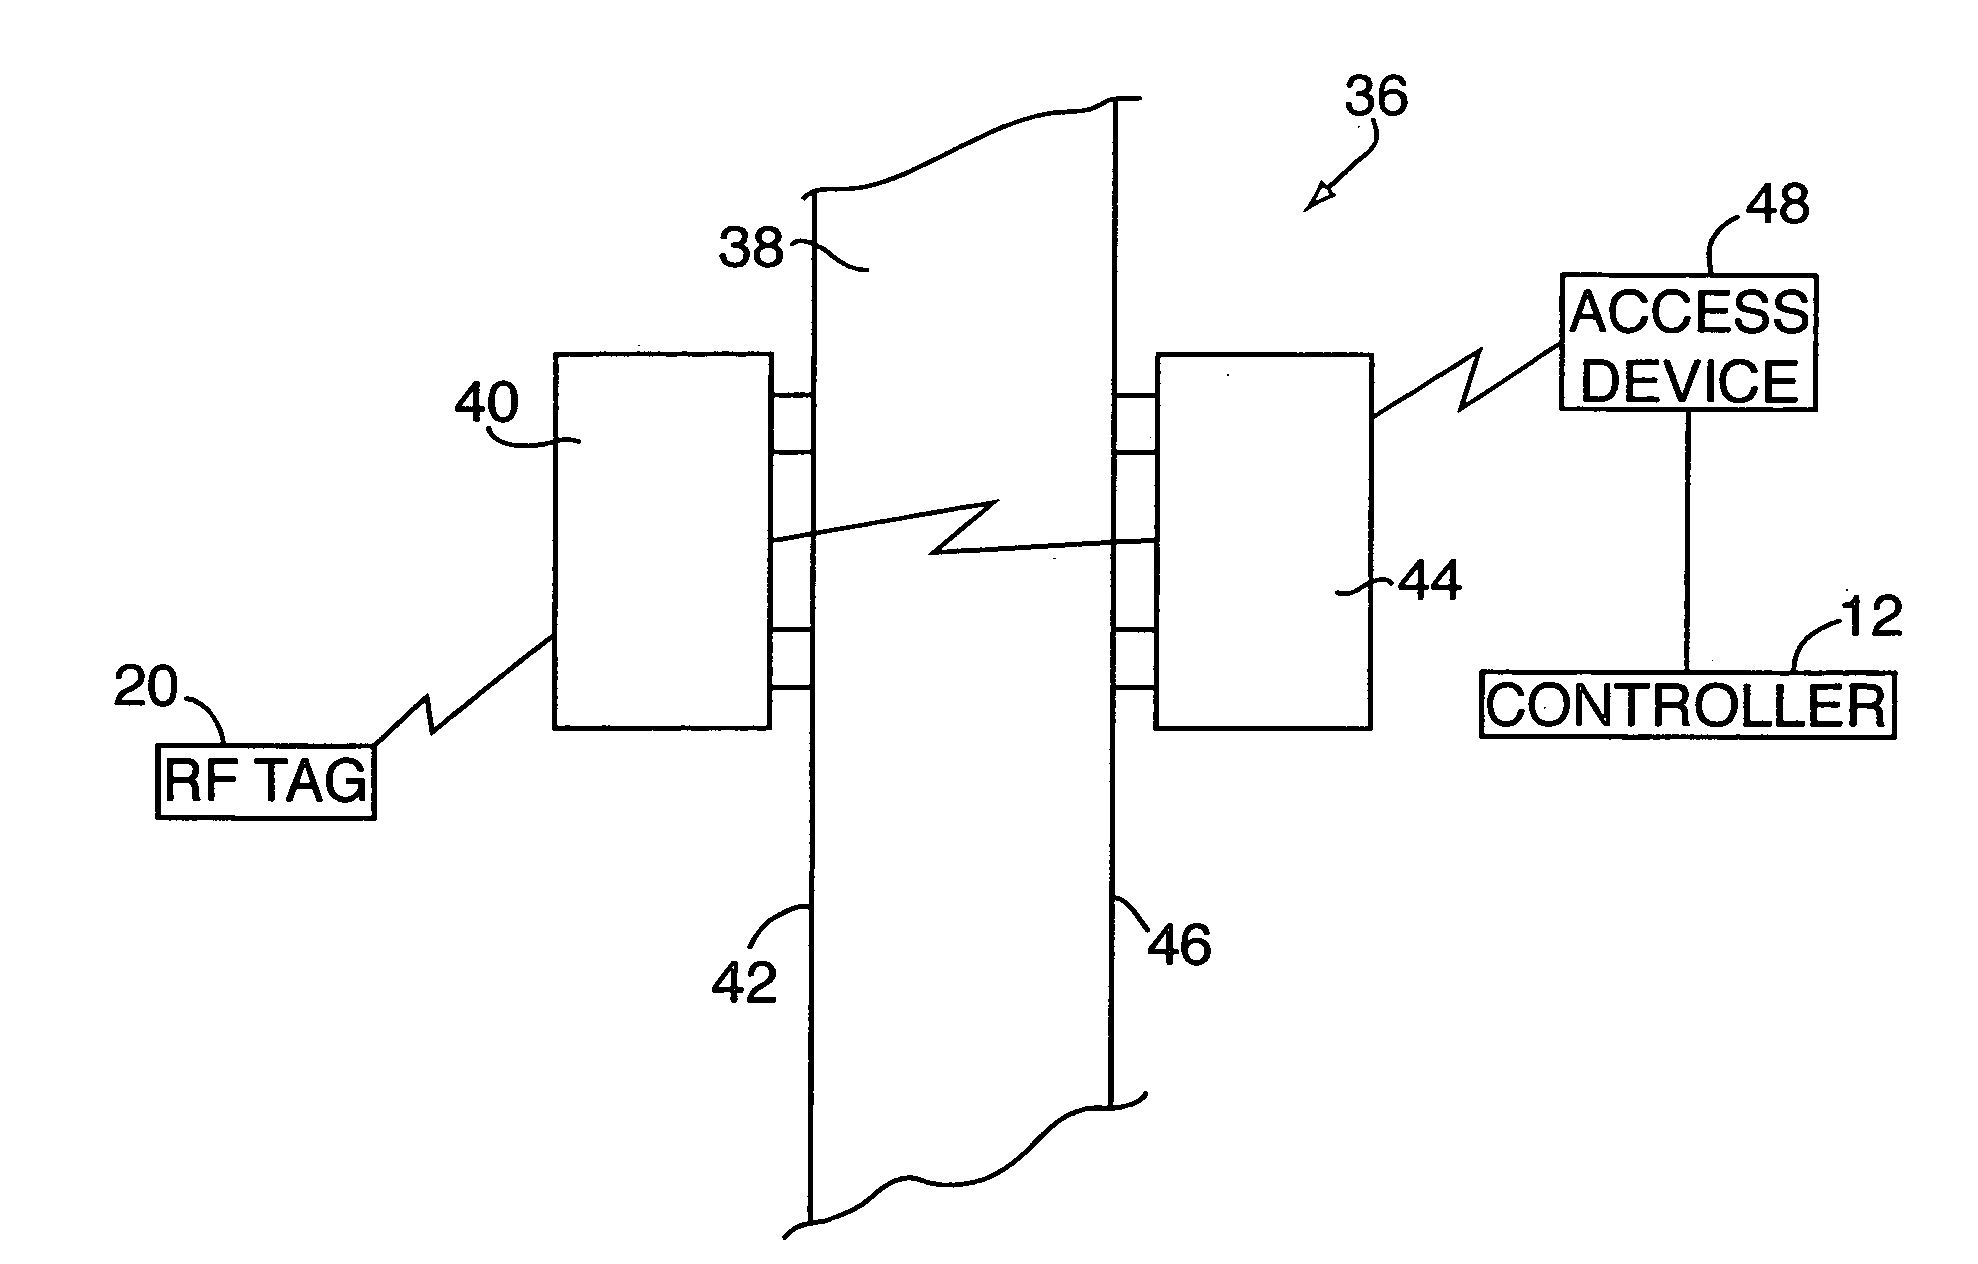 Electronic security system for monitoring and recording activity and data relating to persons or cargo